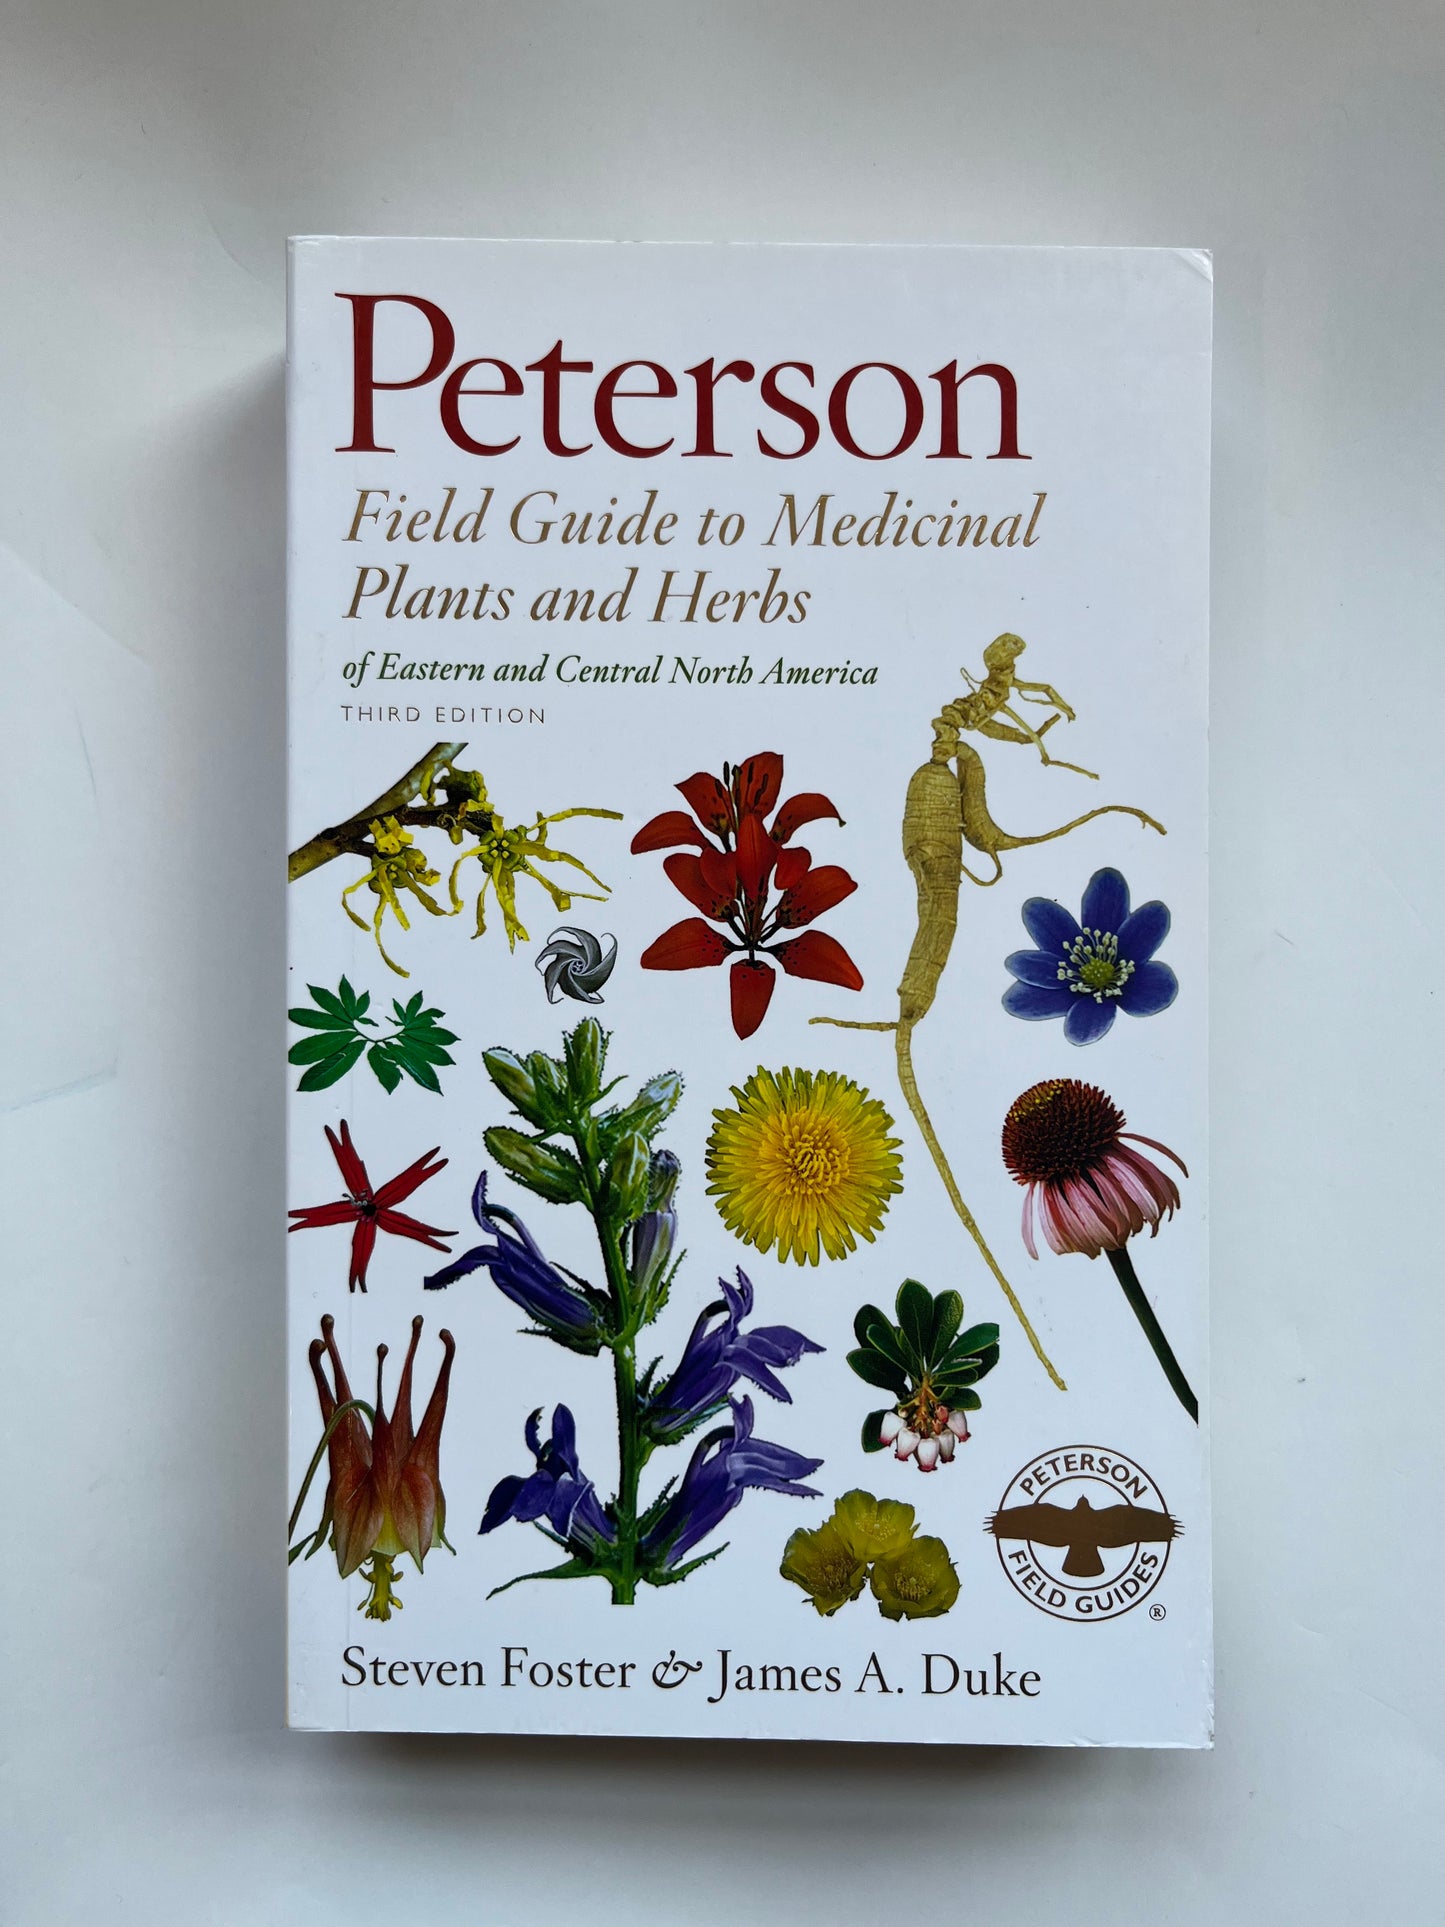 Peterson: Field Guide to Medicinal Plants and Herbs